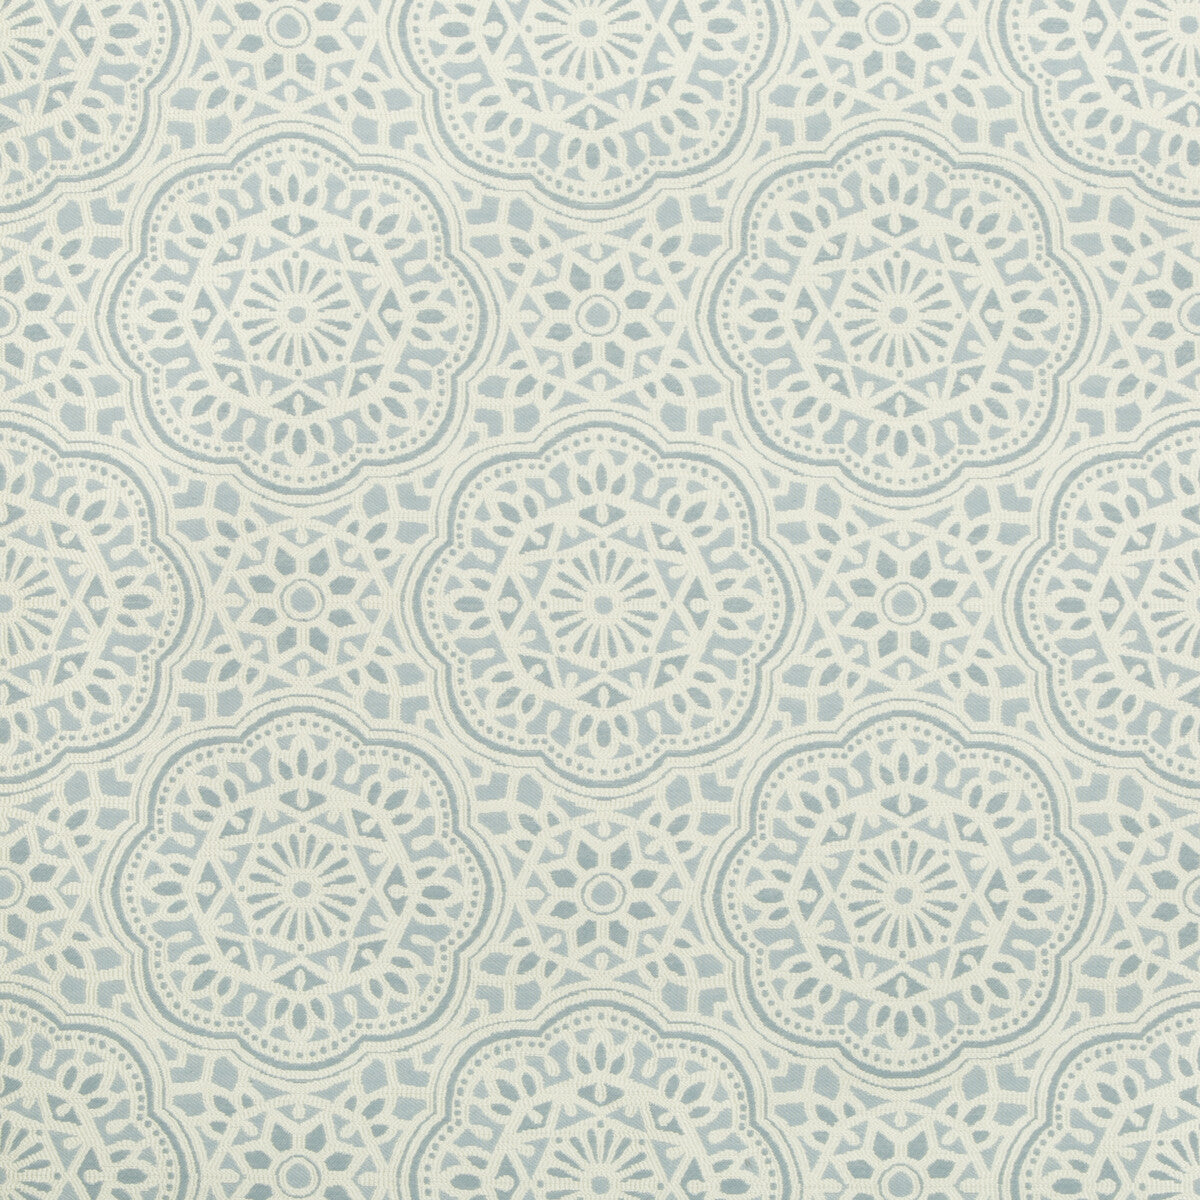 Kravet Contract fabric in 34769-1615 color - pattern 34769.1615.0 - by Kravet Contract in the Gis collection